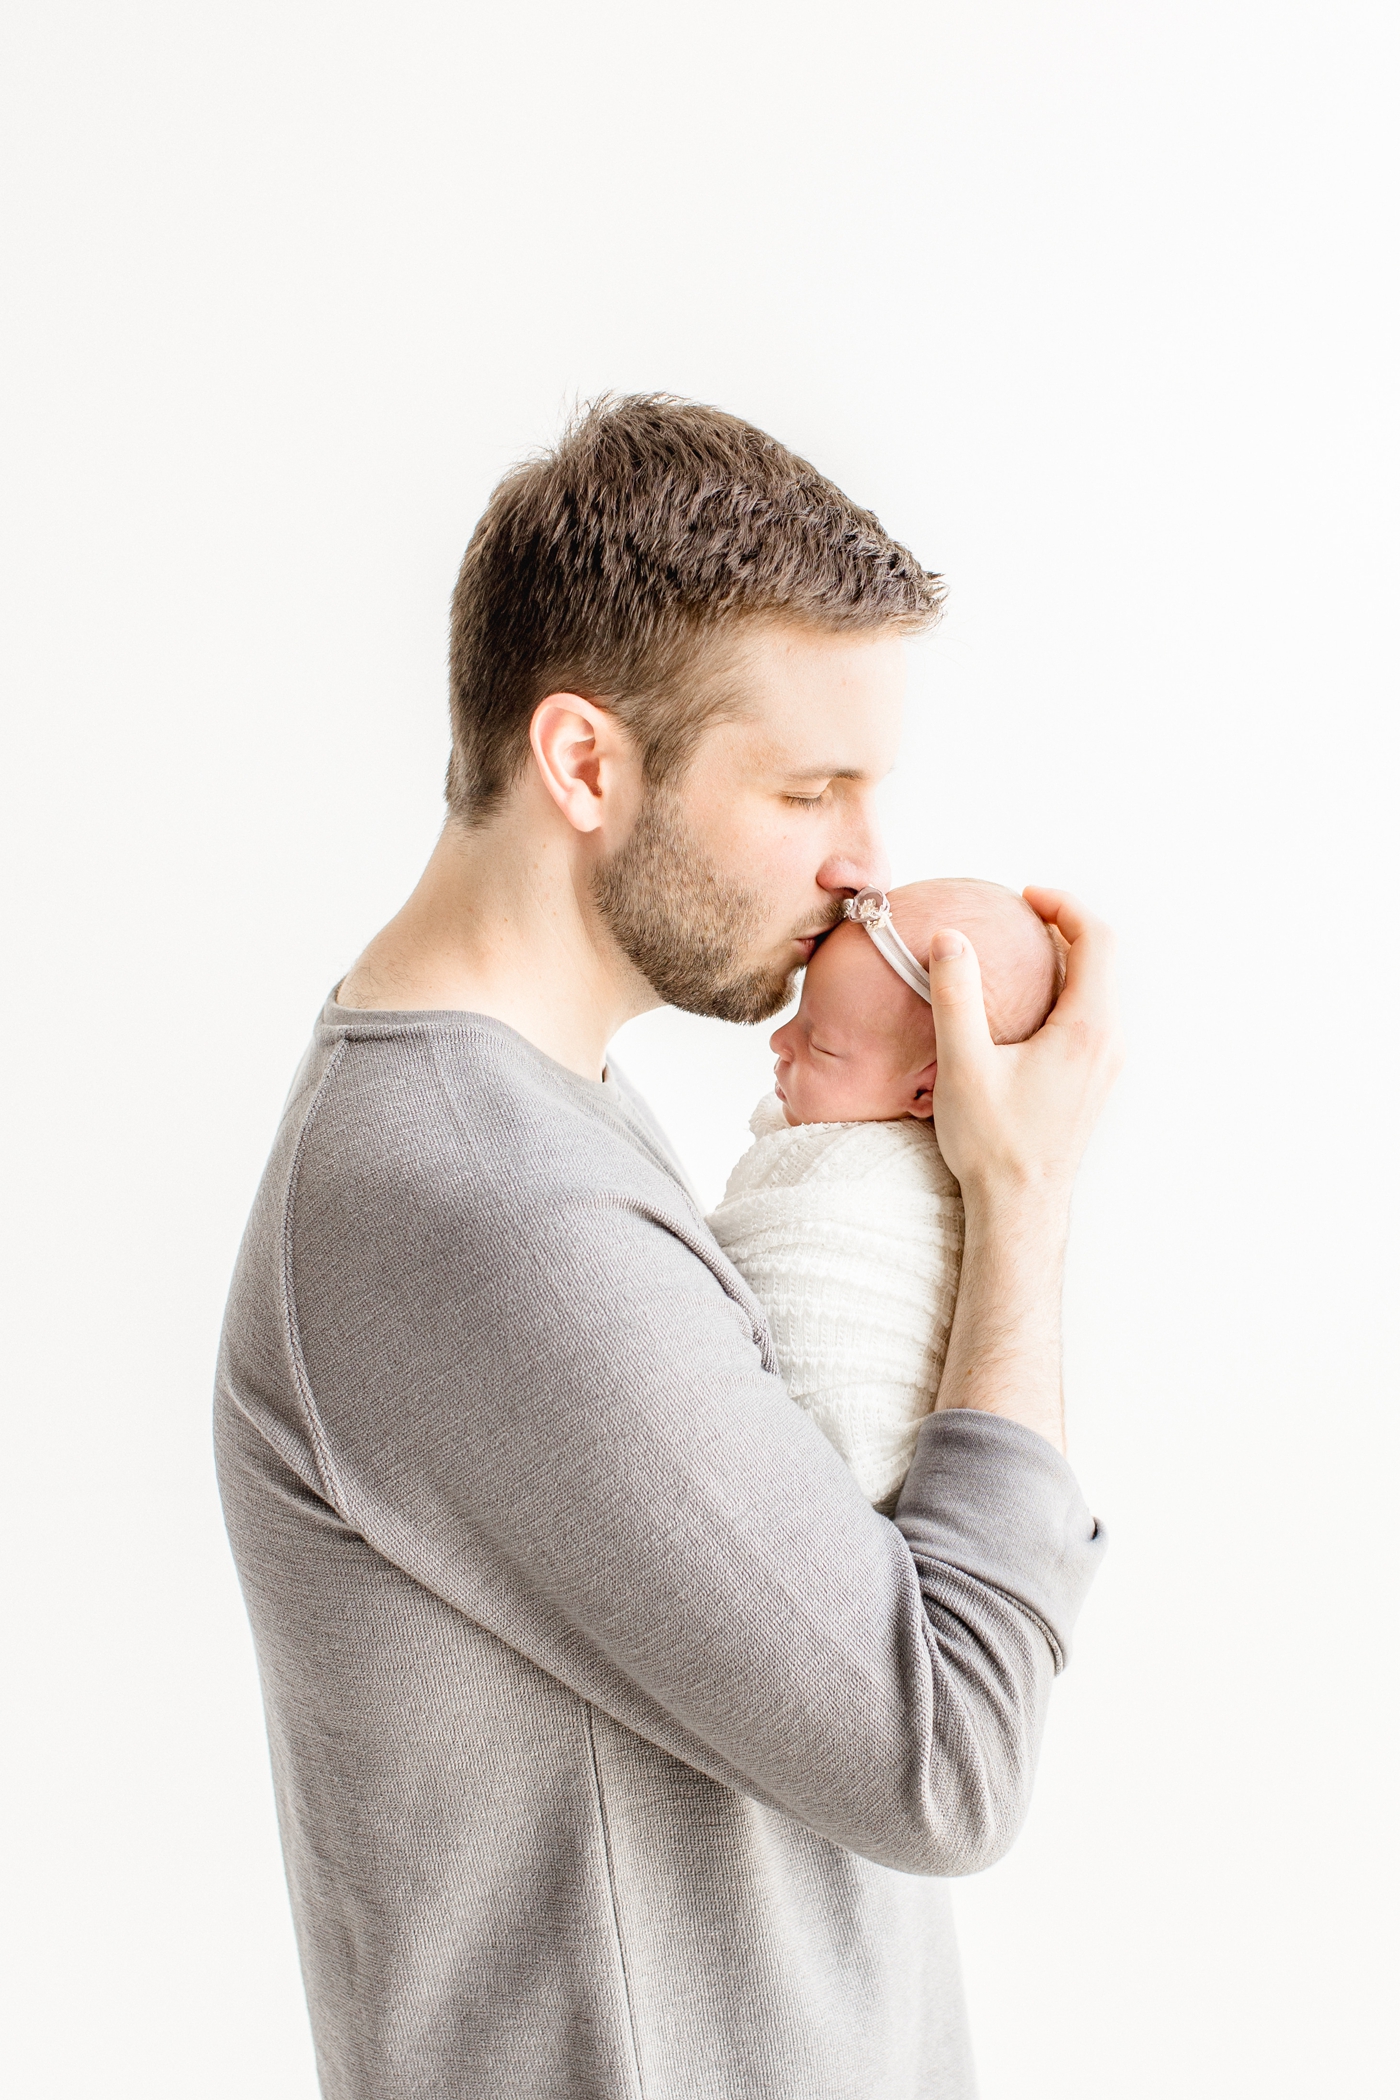 Dad kissing baby during studio newborn session in Austin, TX. Photo by Sana Ahmed Photography.